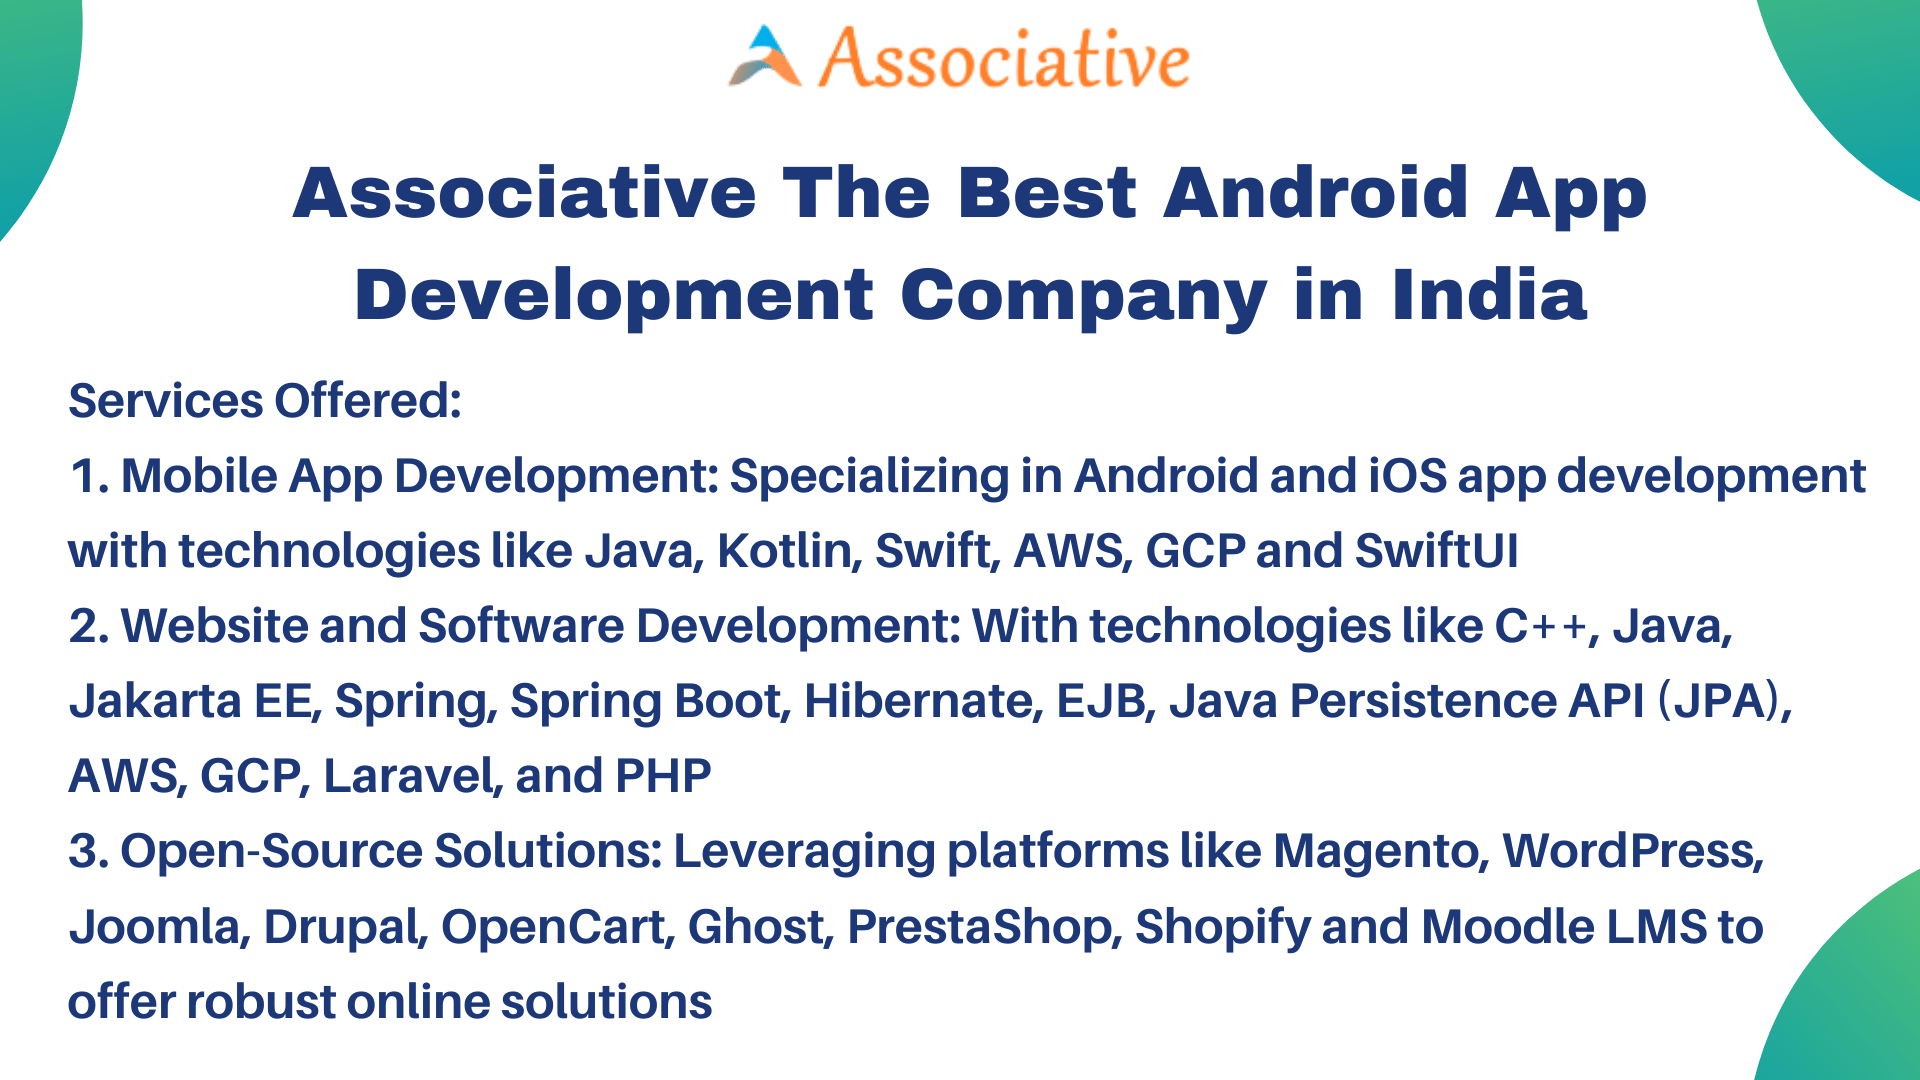 Associative The Best Android App Development Company in India